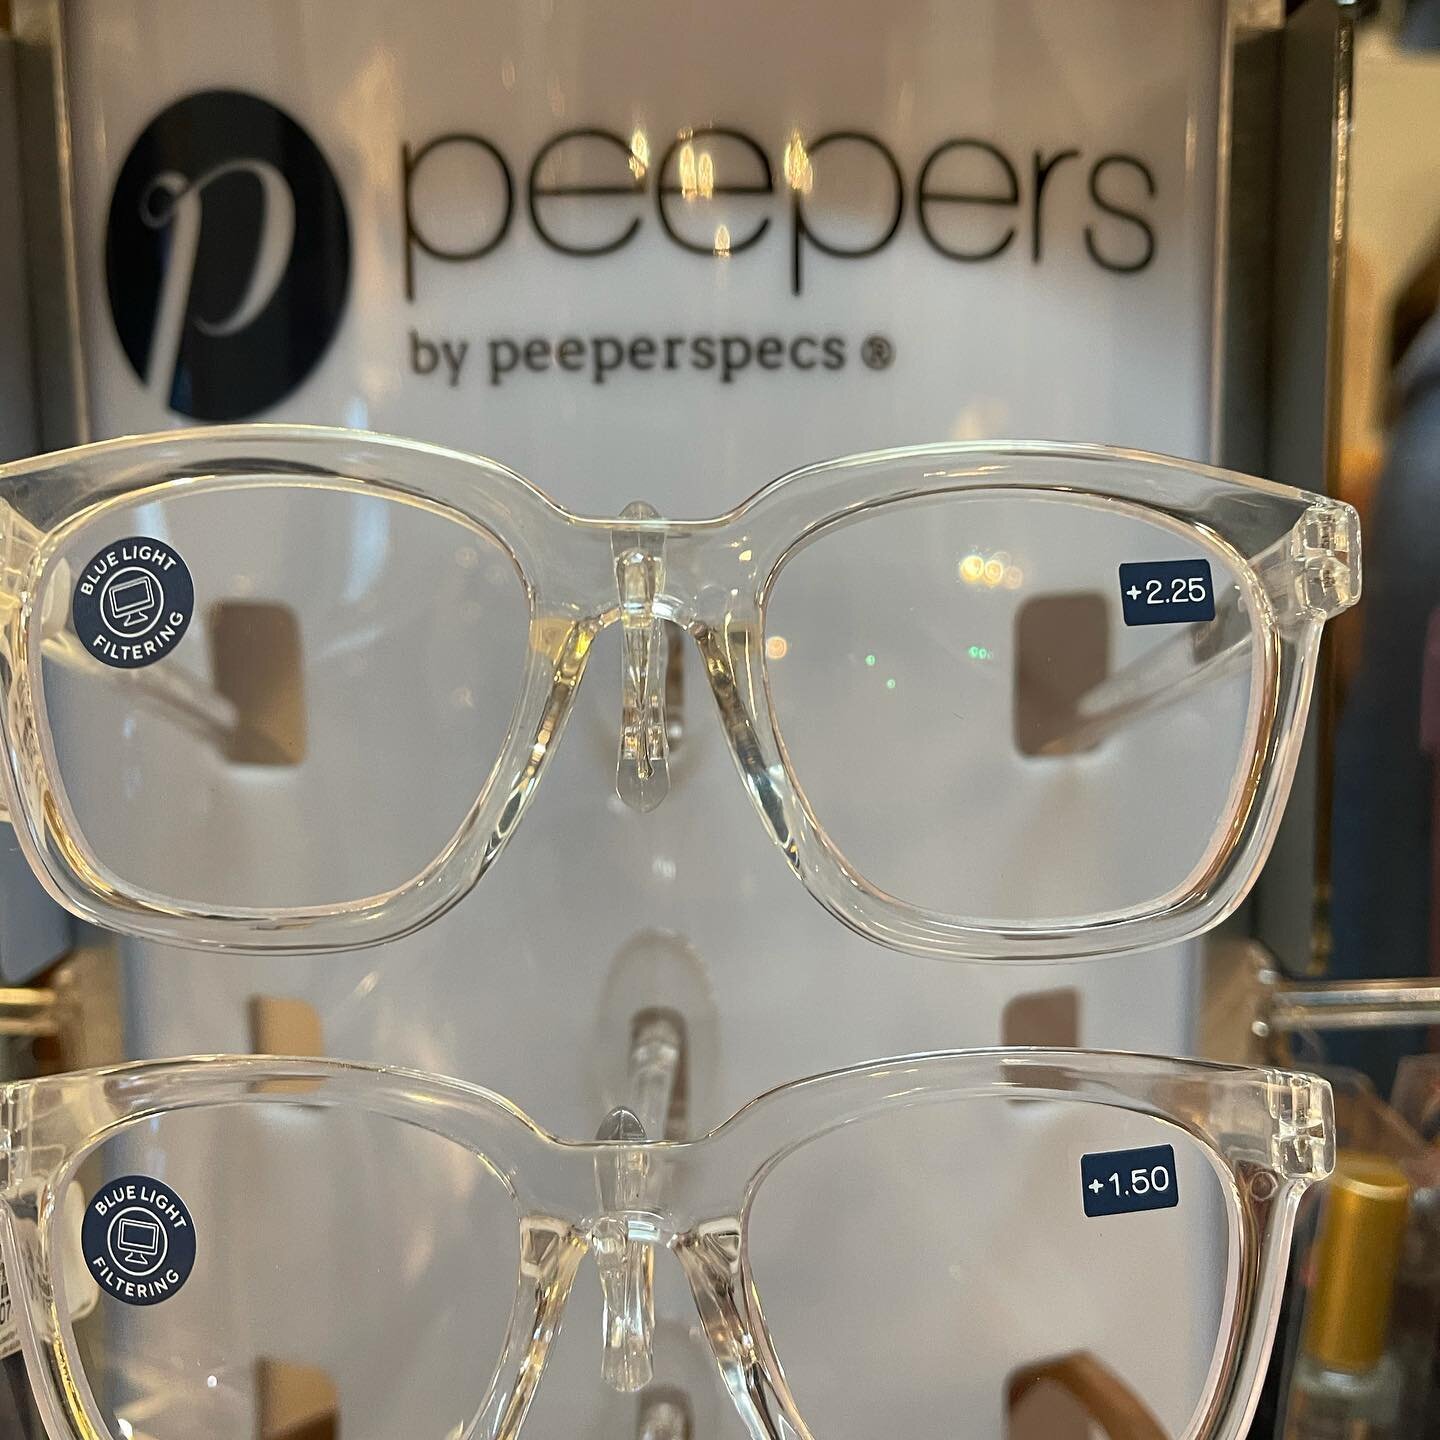 New Peepers readers!!! We gotta see!!! #shopaim #shoplocal #athensga #peepers_readers  #lovetosee swipe for more pics➡️